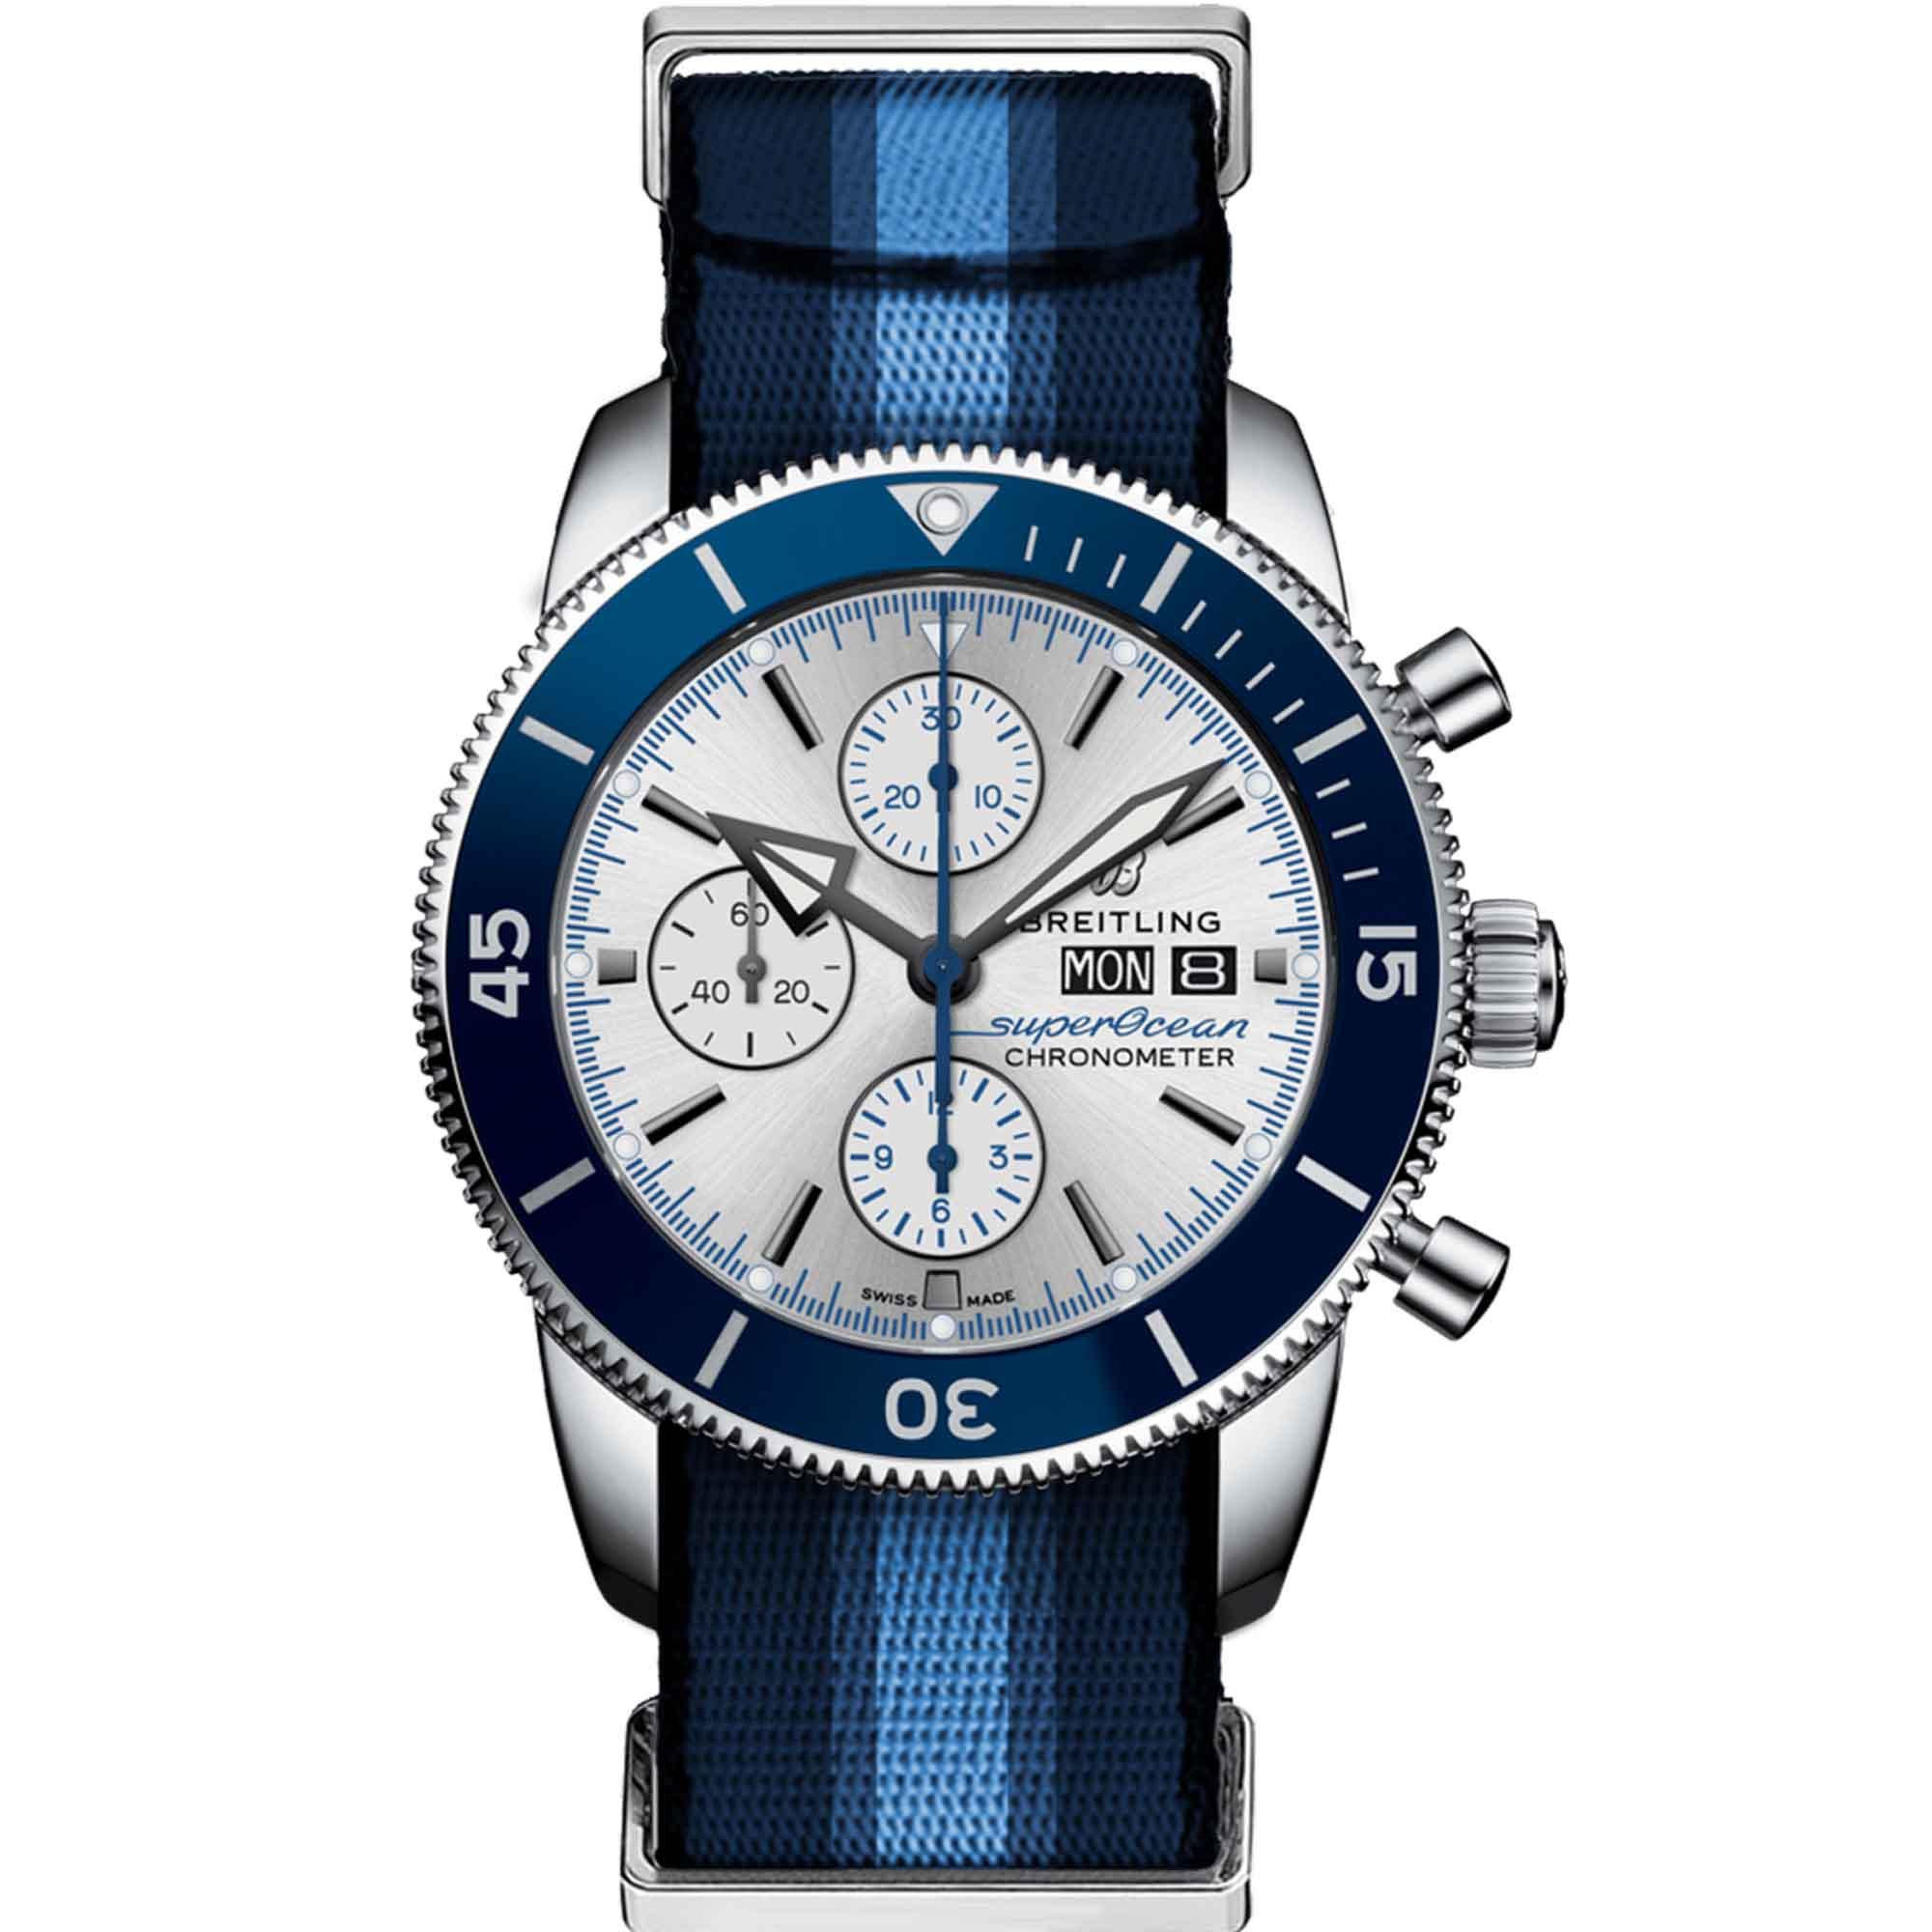 Breitling  Superocean Heritage Chronograph 44 Ocean Conservancy Limited Edition (Ref: A133131A1G1W1)